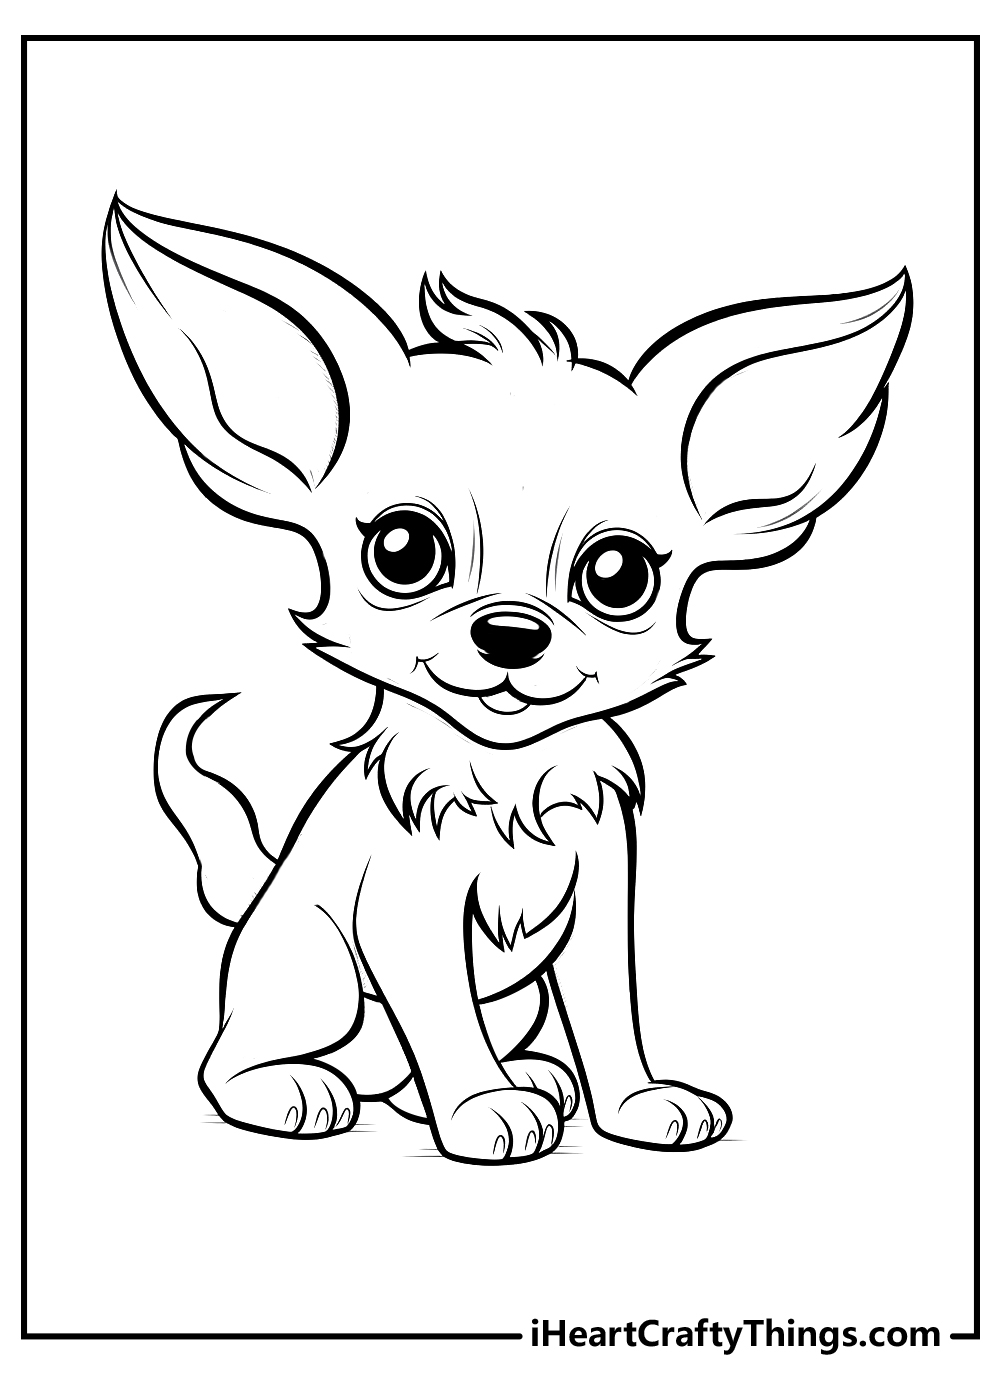 chihuahua coloring sheet for kids